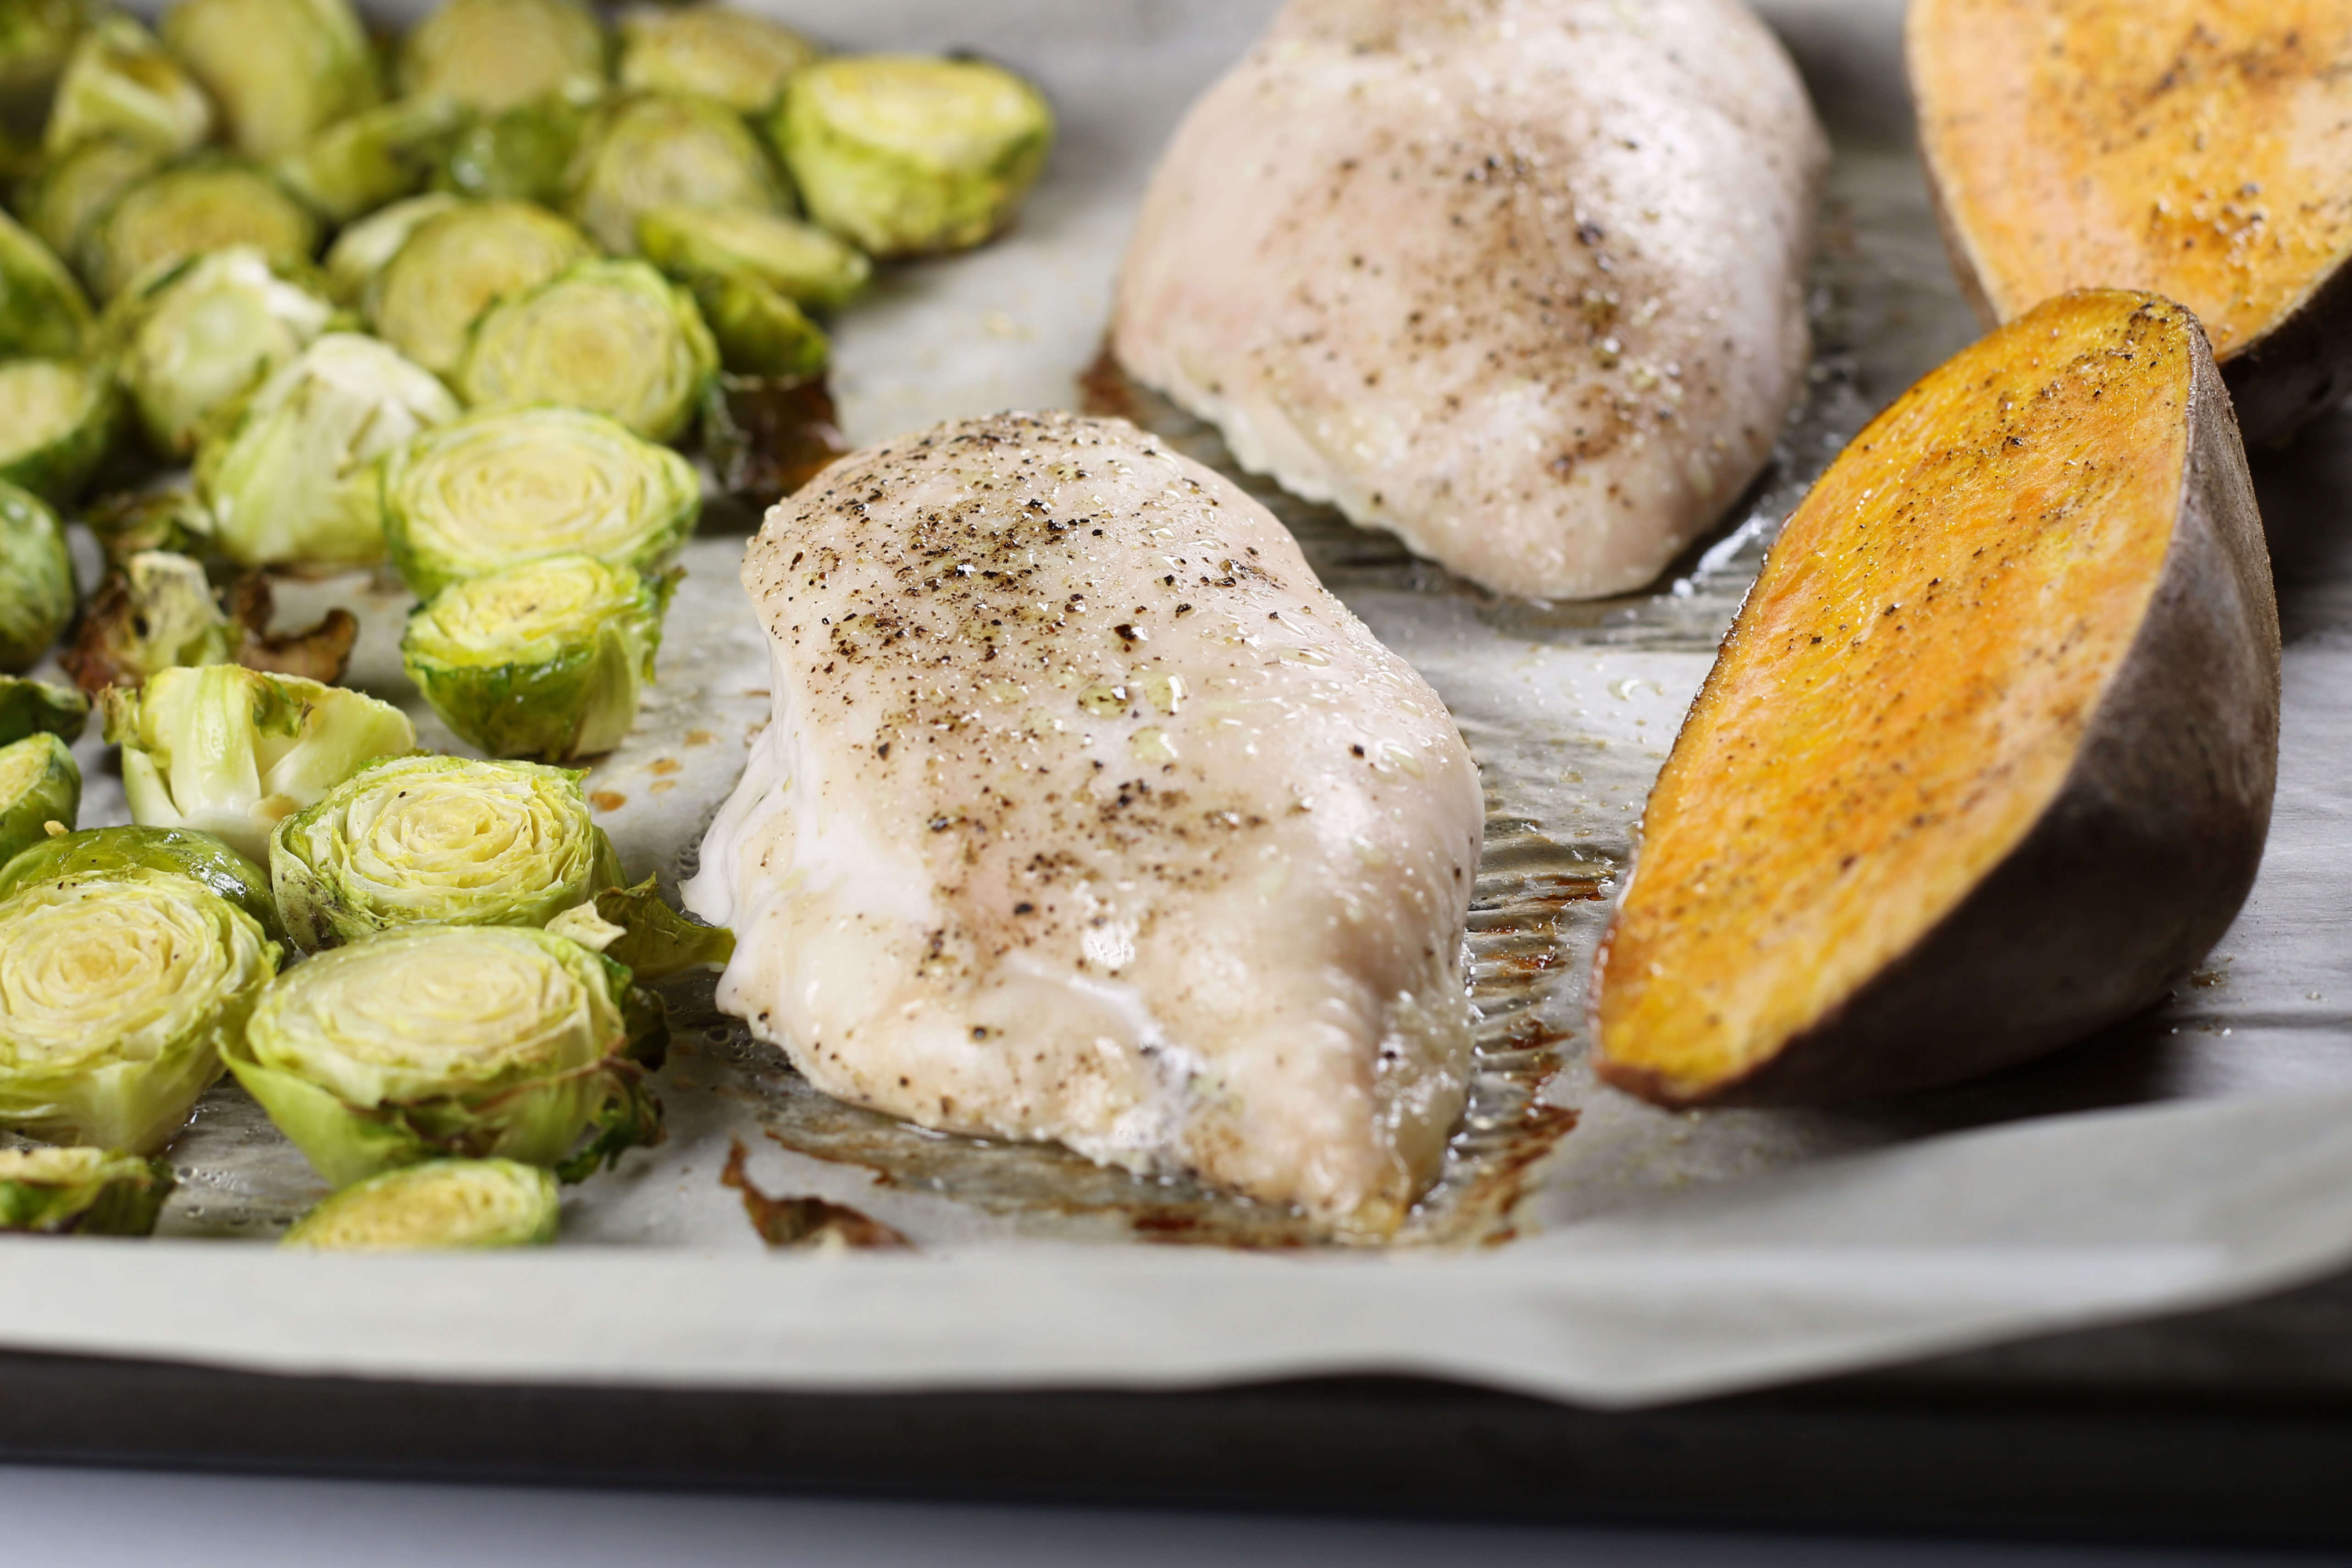 20 Simple Meals to Help Your Clients Hit Their Macros: One Pan Paleo Plate